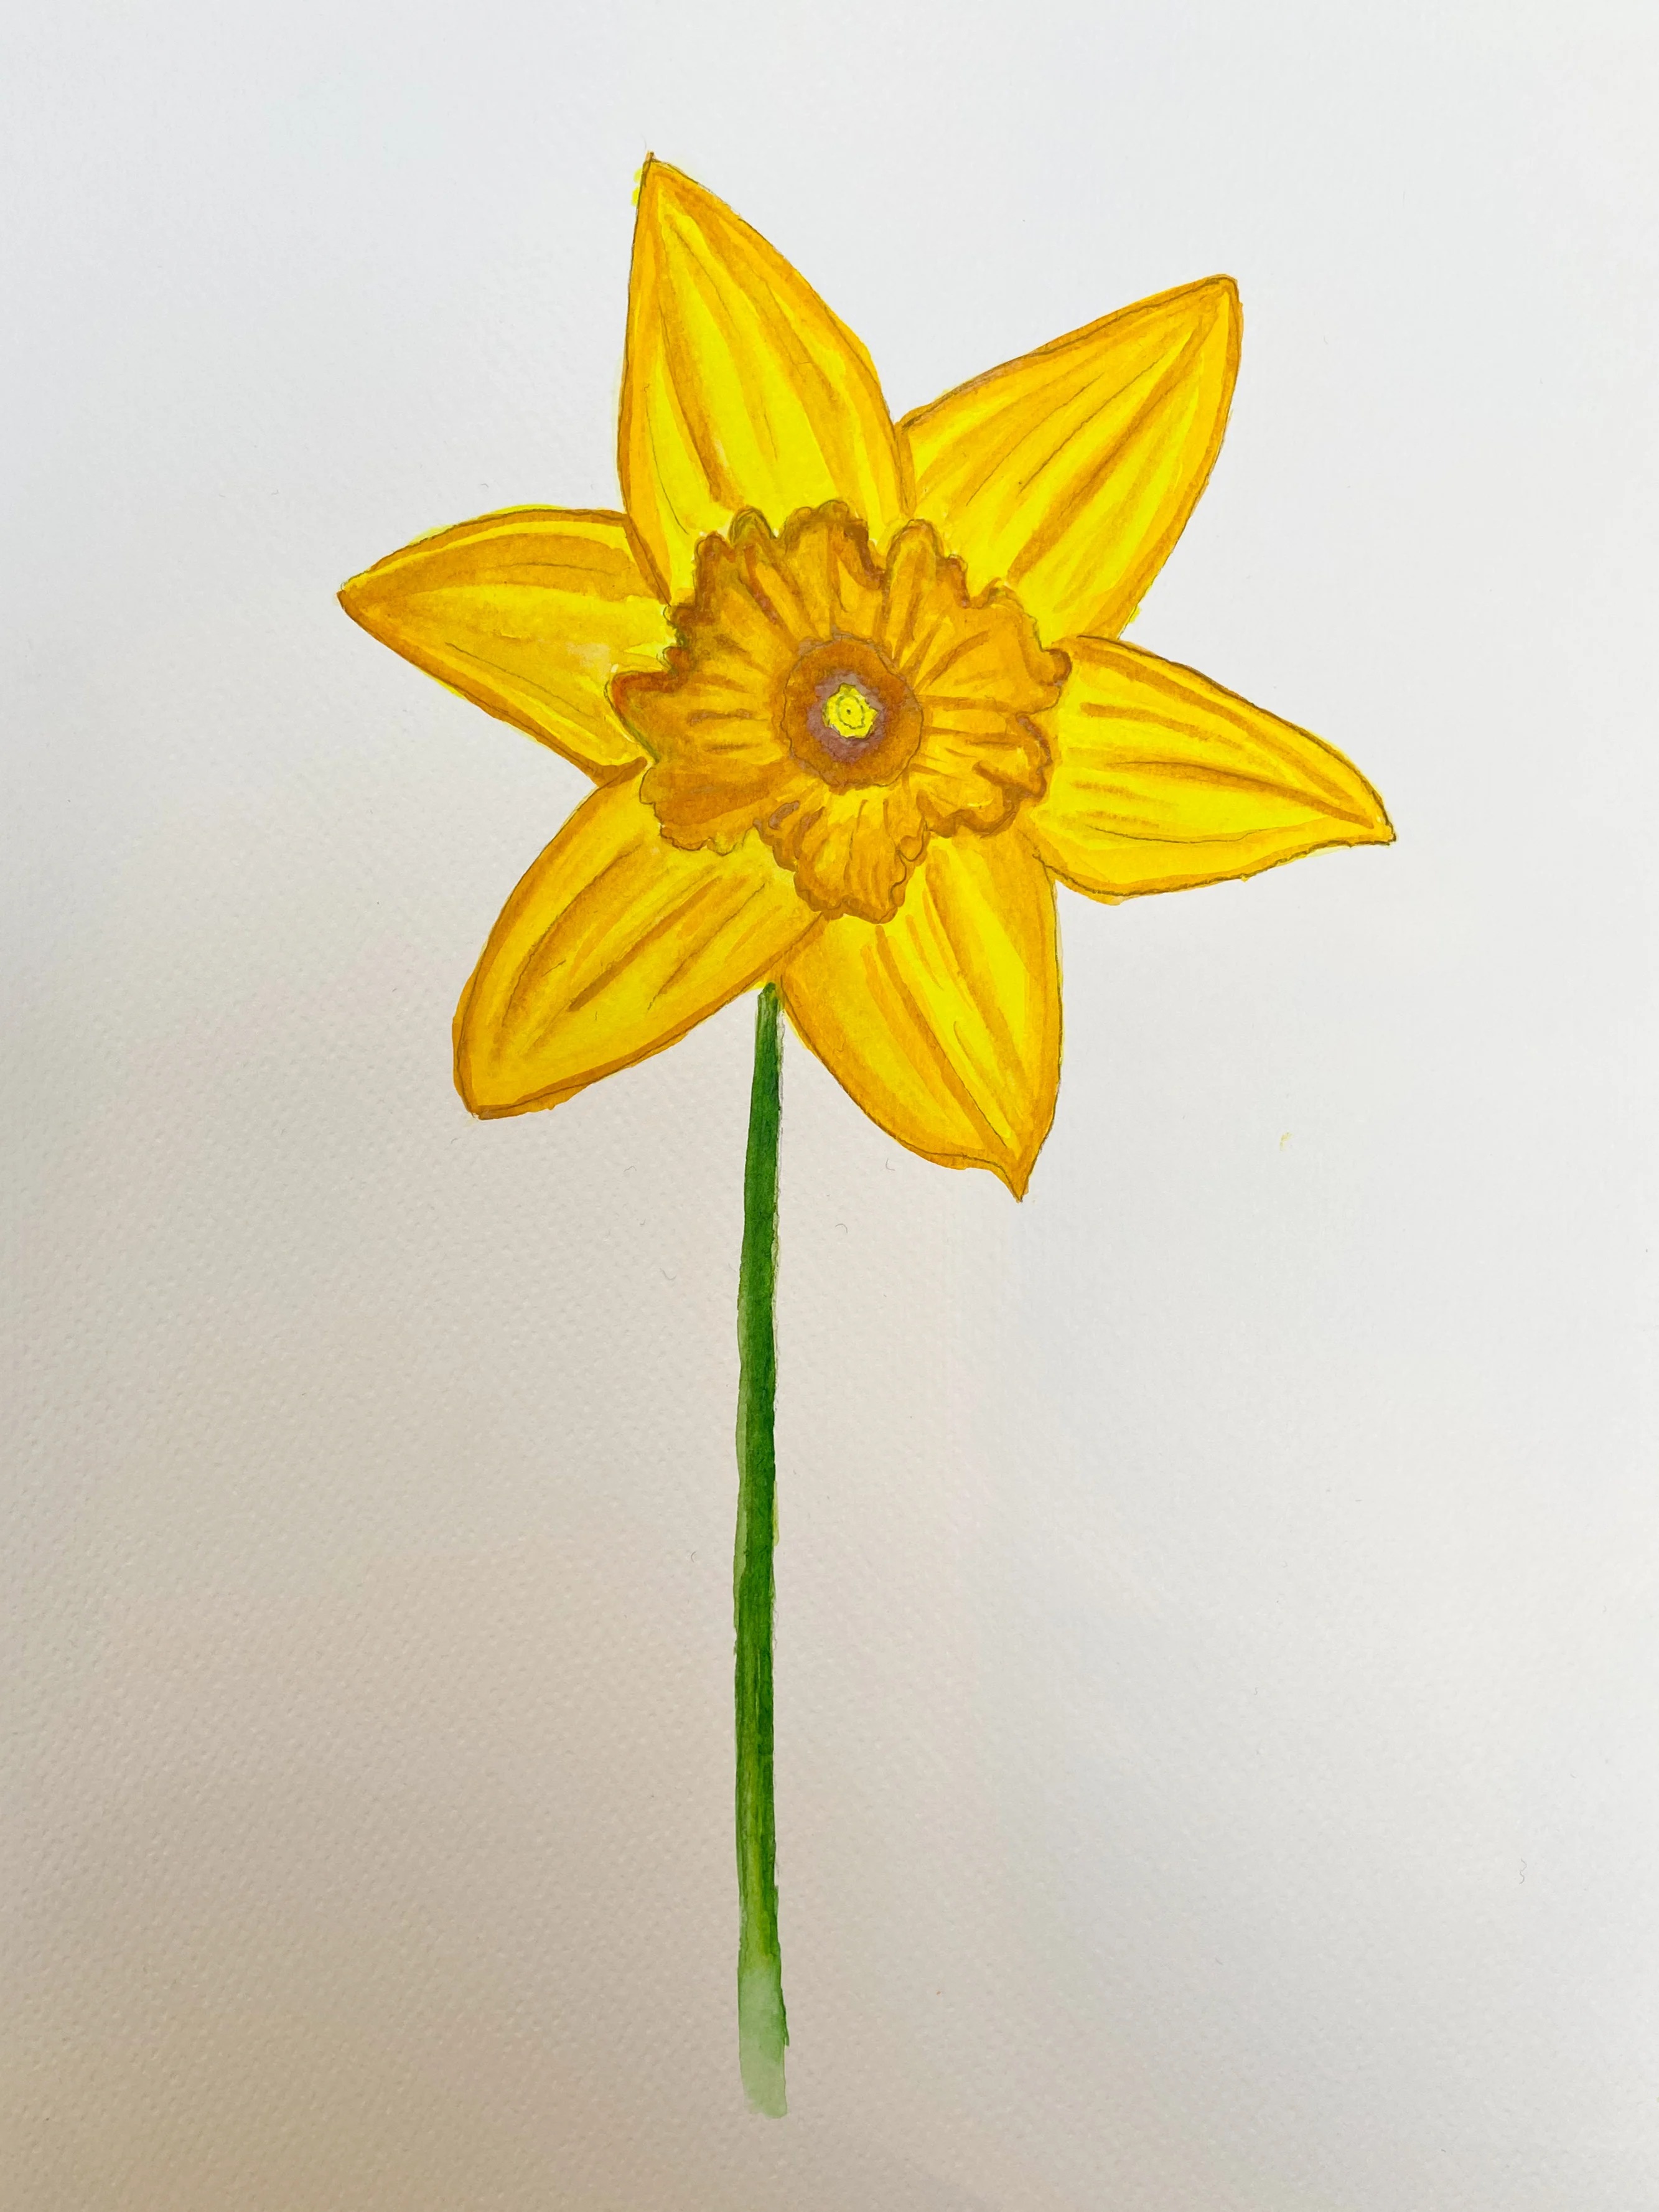 How to draw a daffodil front view